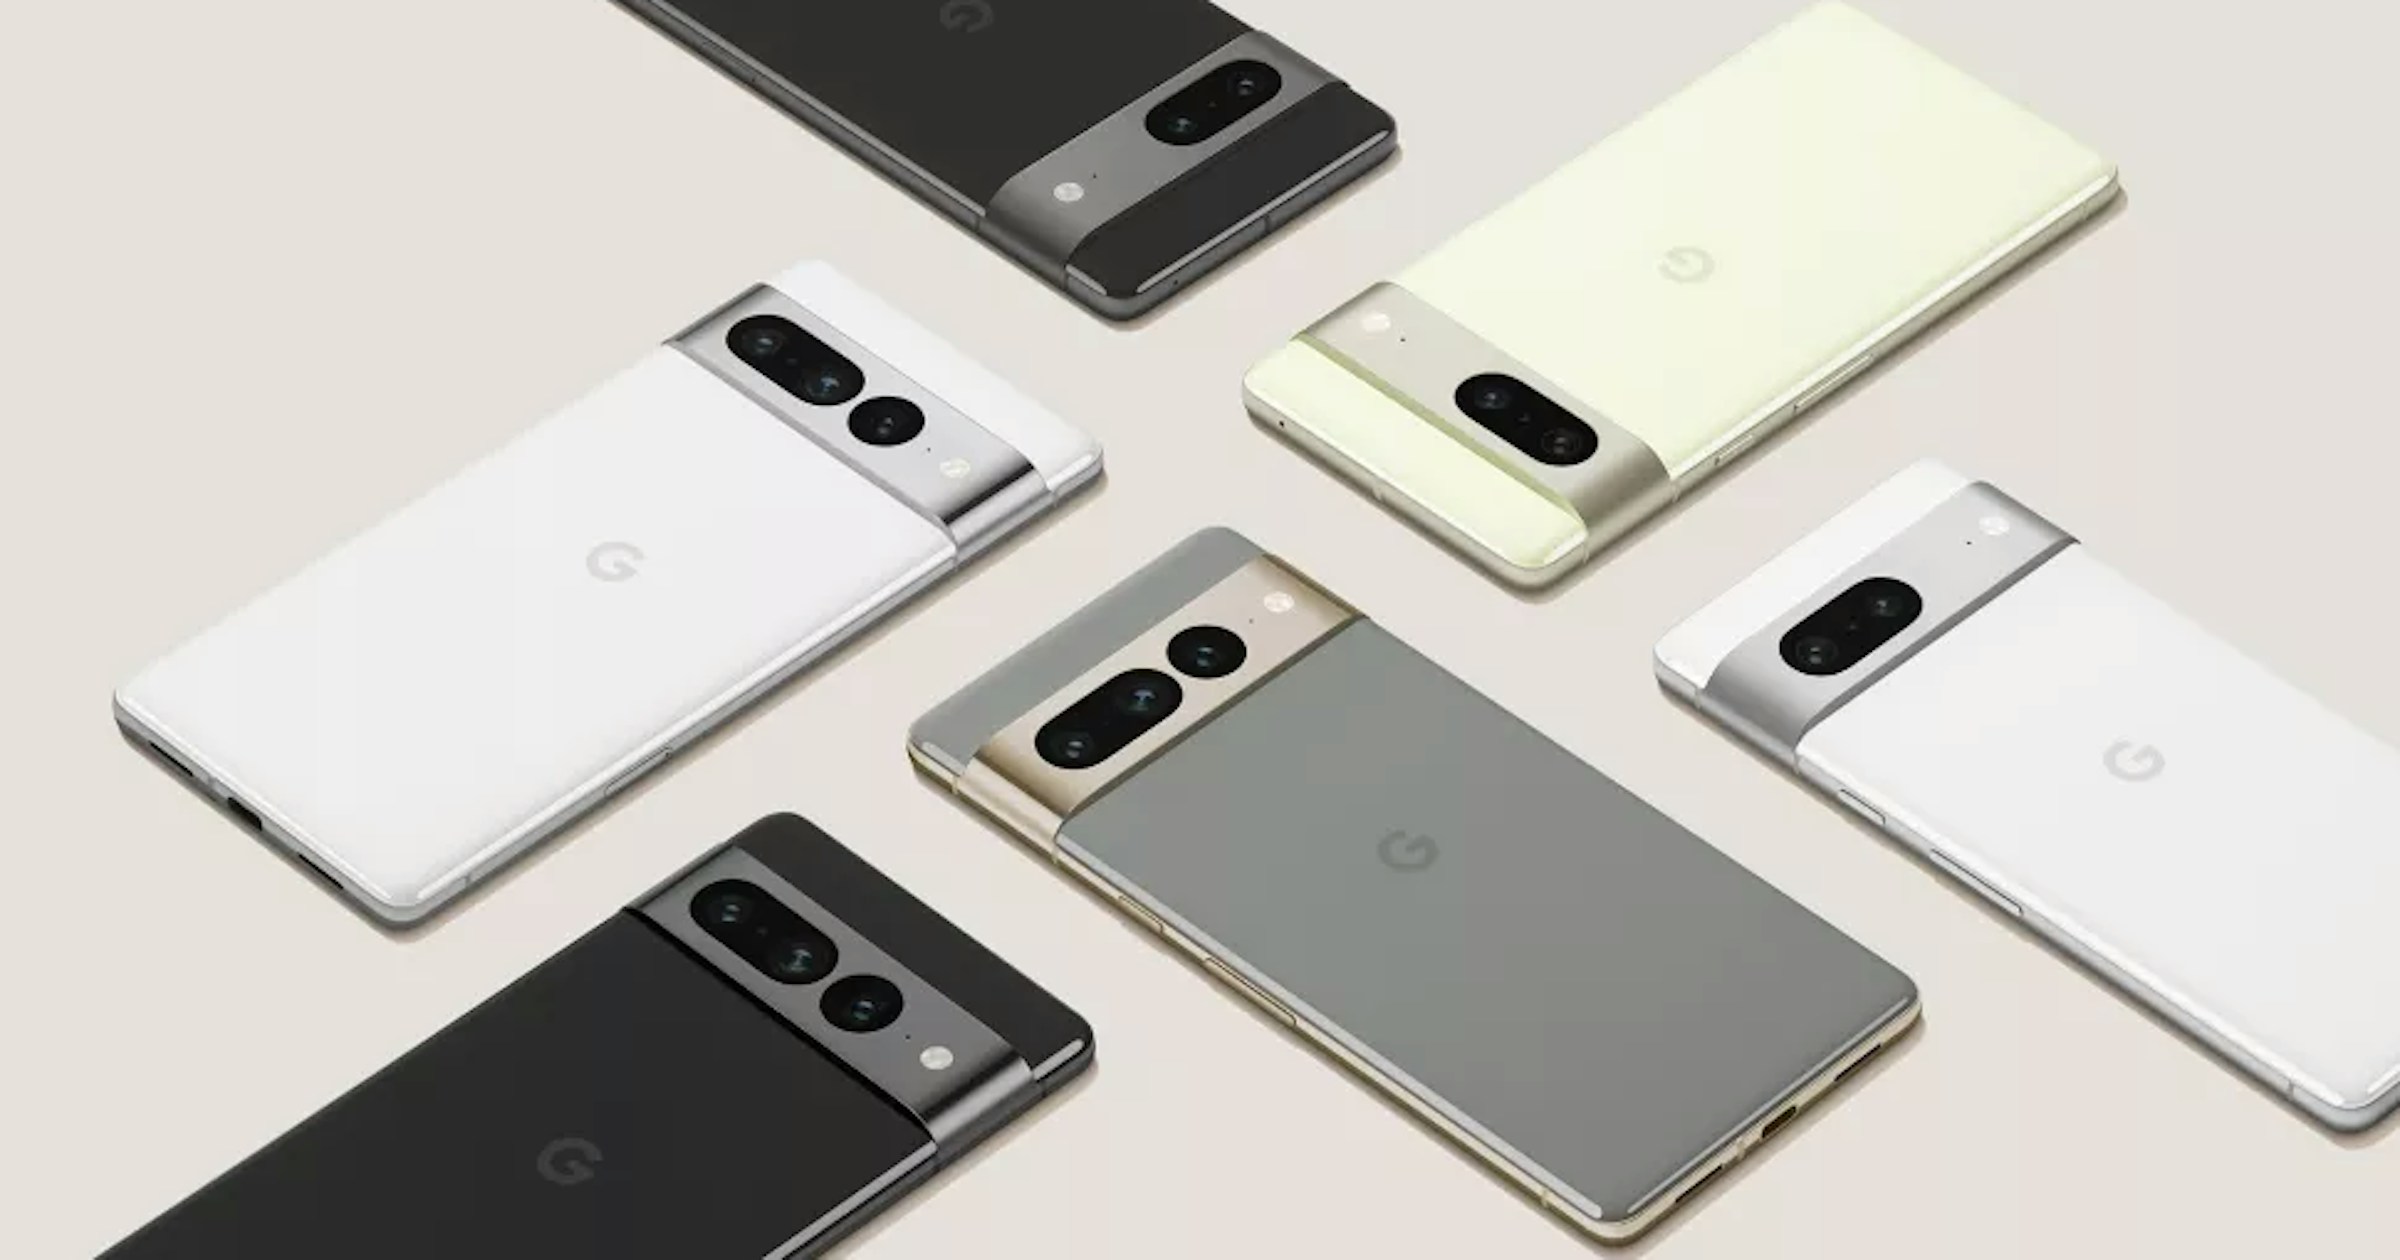 The most prominent devices expected to be launched during Google’s Thursday party